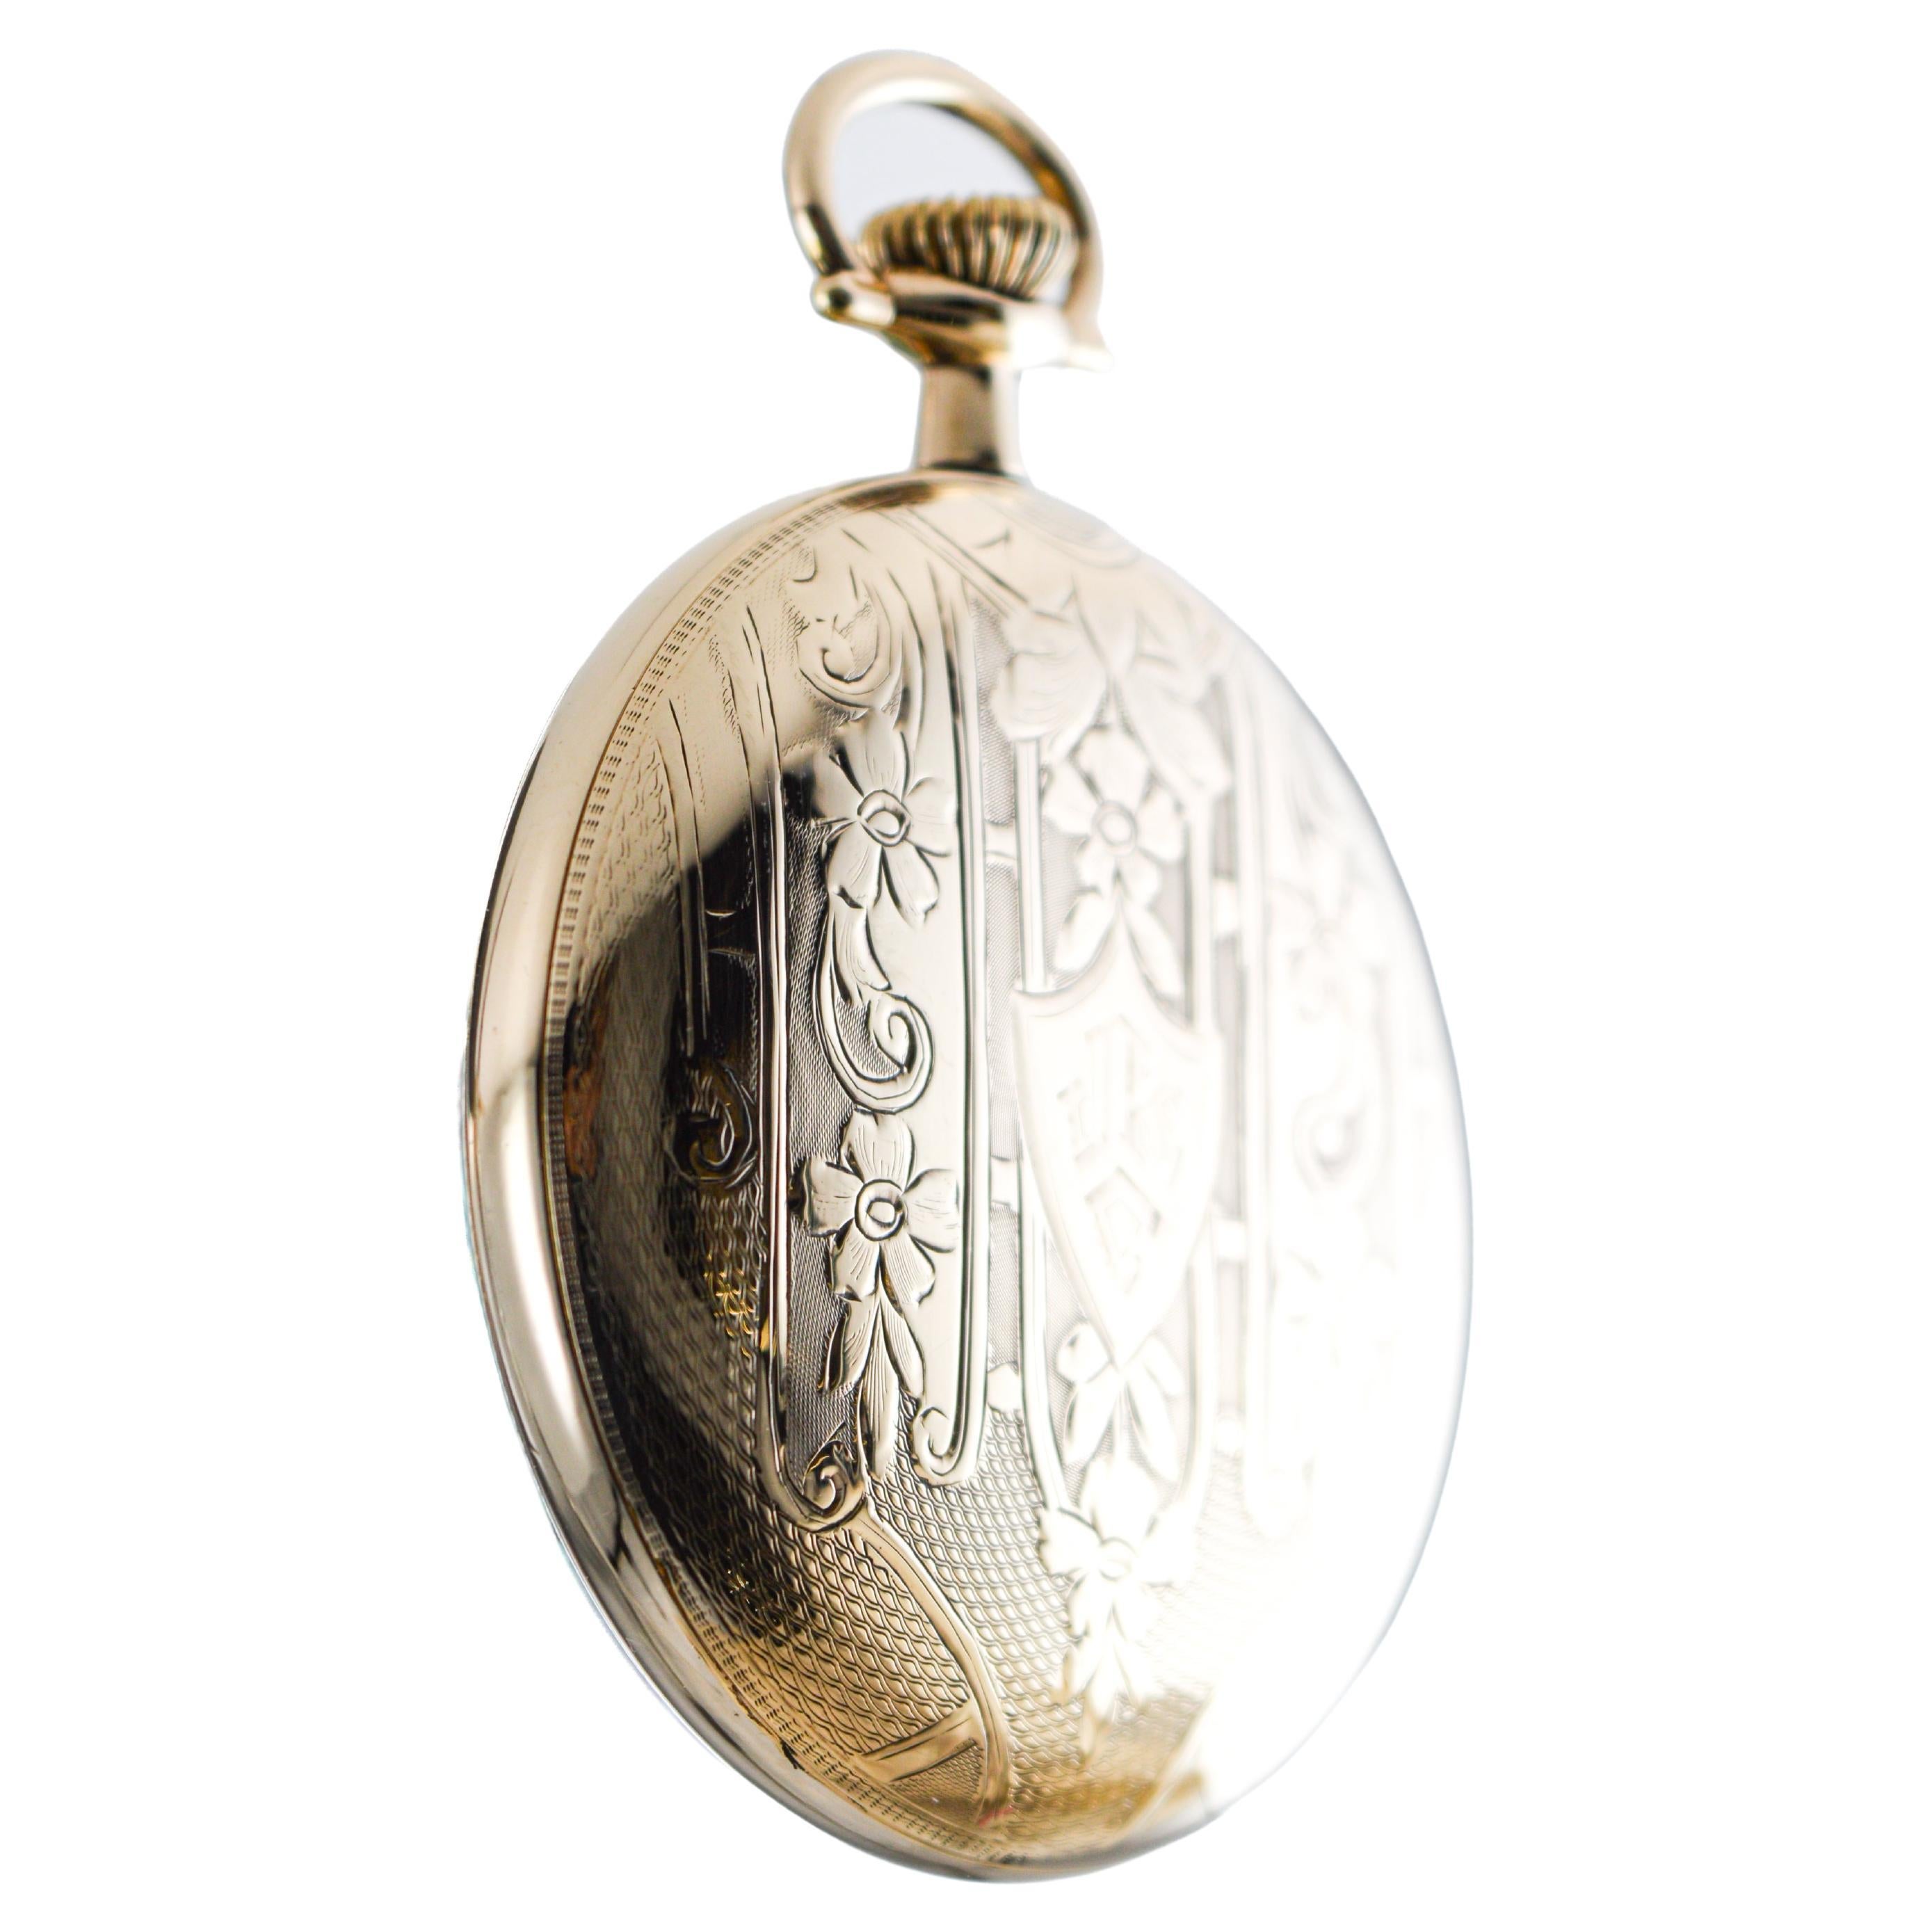 Women's or Men's Elgin Gold Filled Art Deco Pocket Watch with Original Aged Crystal From 1916